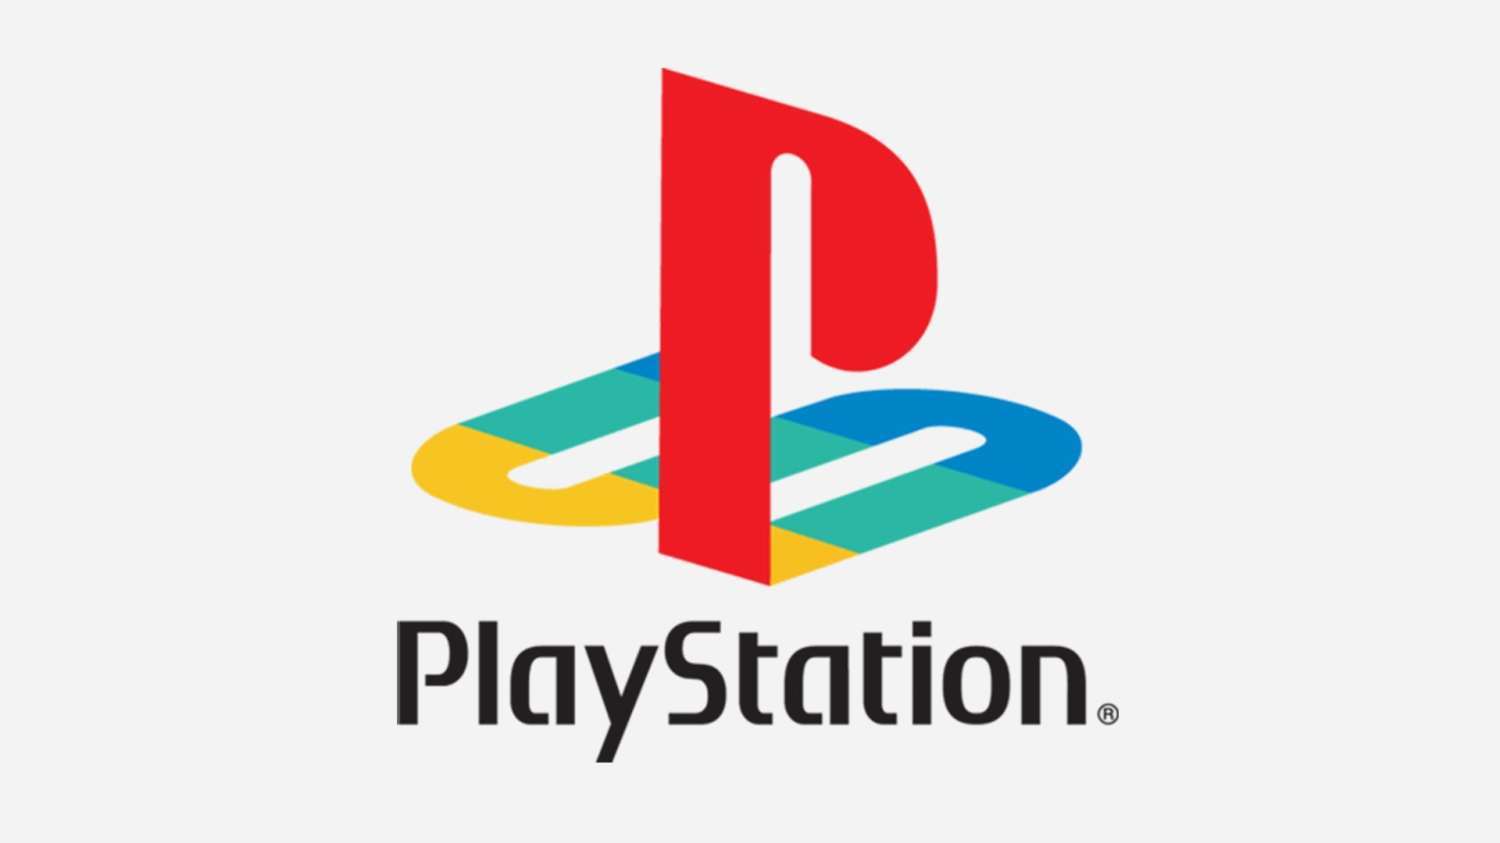 PlayStation Showcase announced for May 24th - here's what to expect